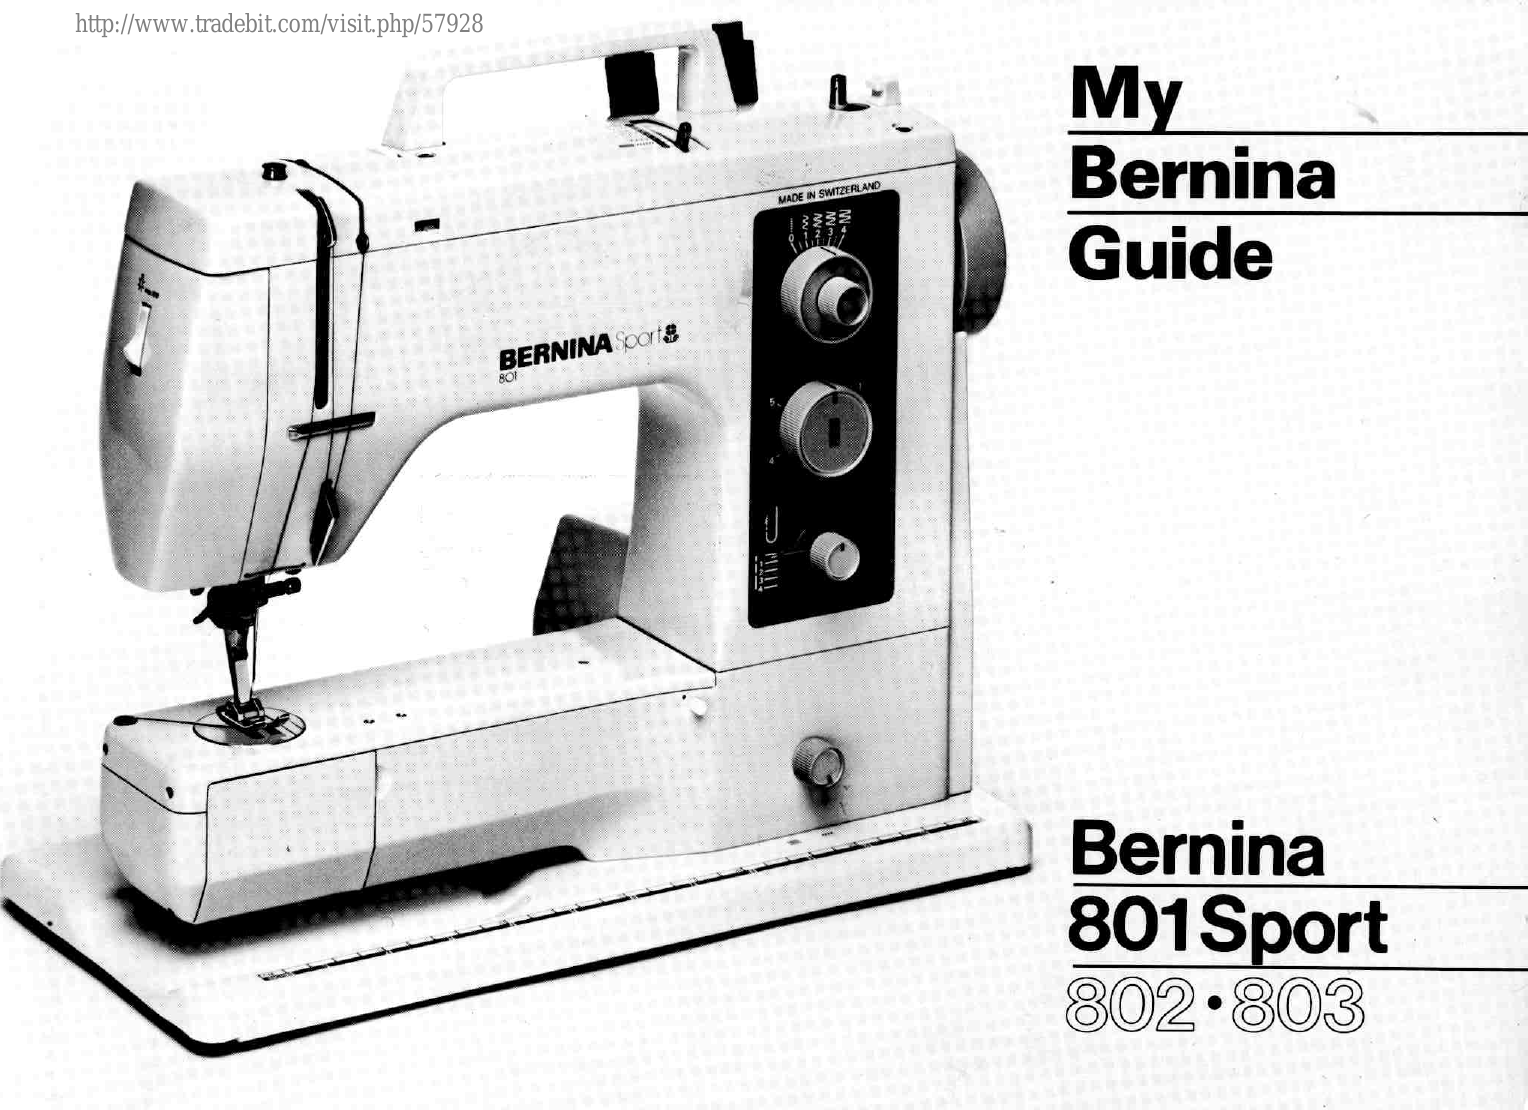 Bernina 801 Sport, 802, 803 sewing machine guide Preview image 1